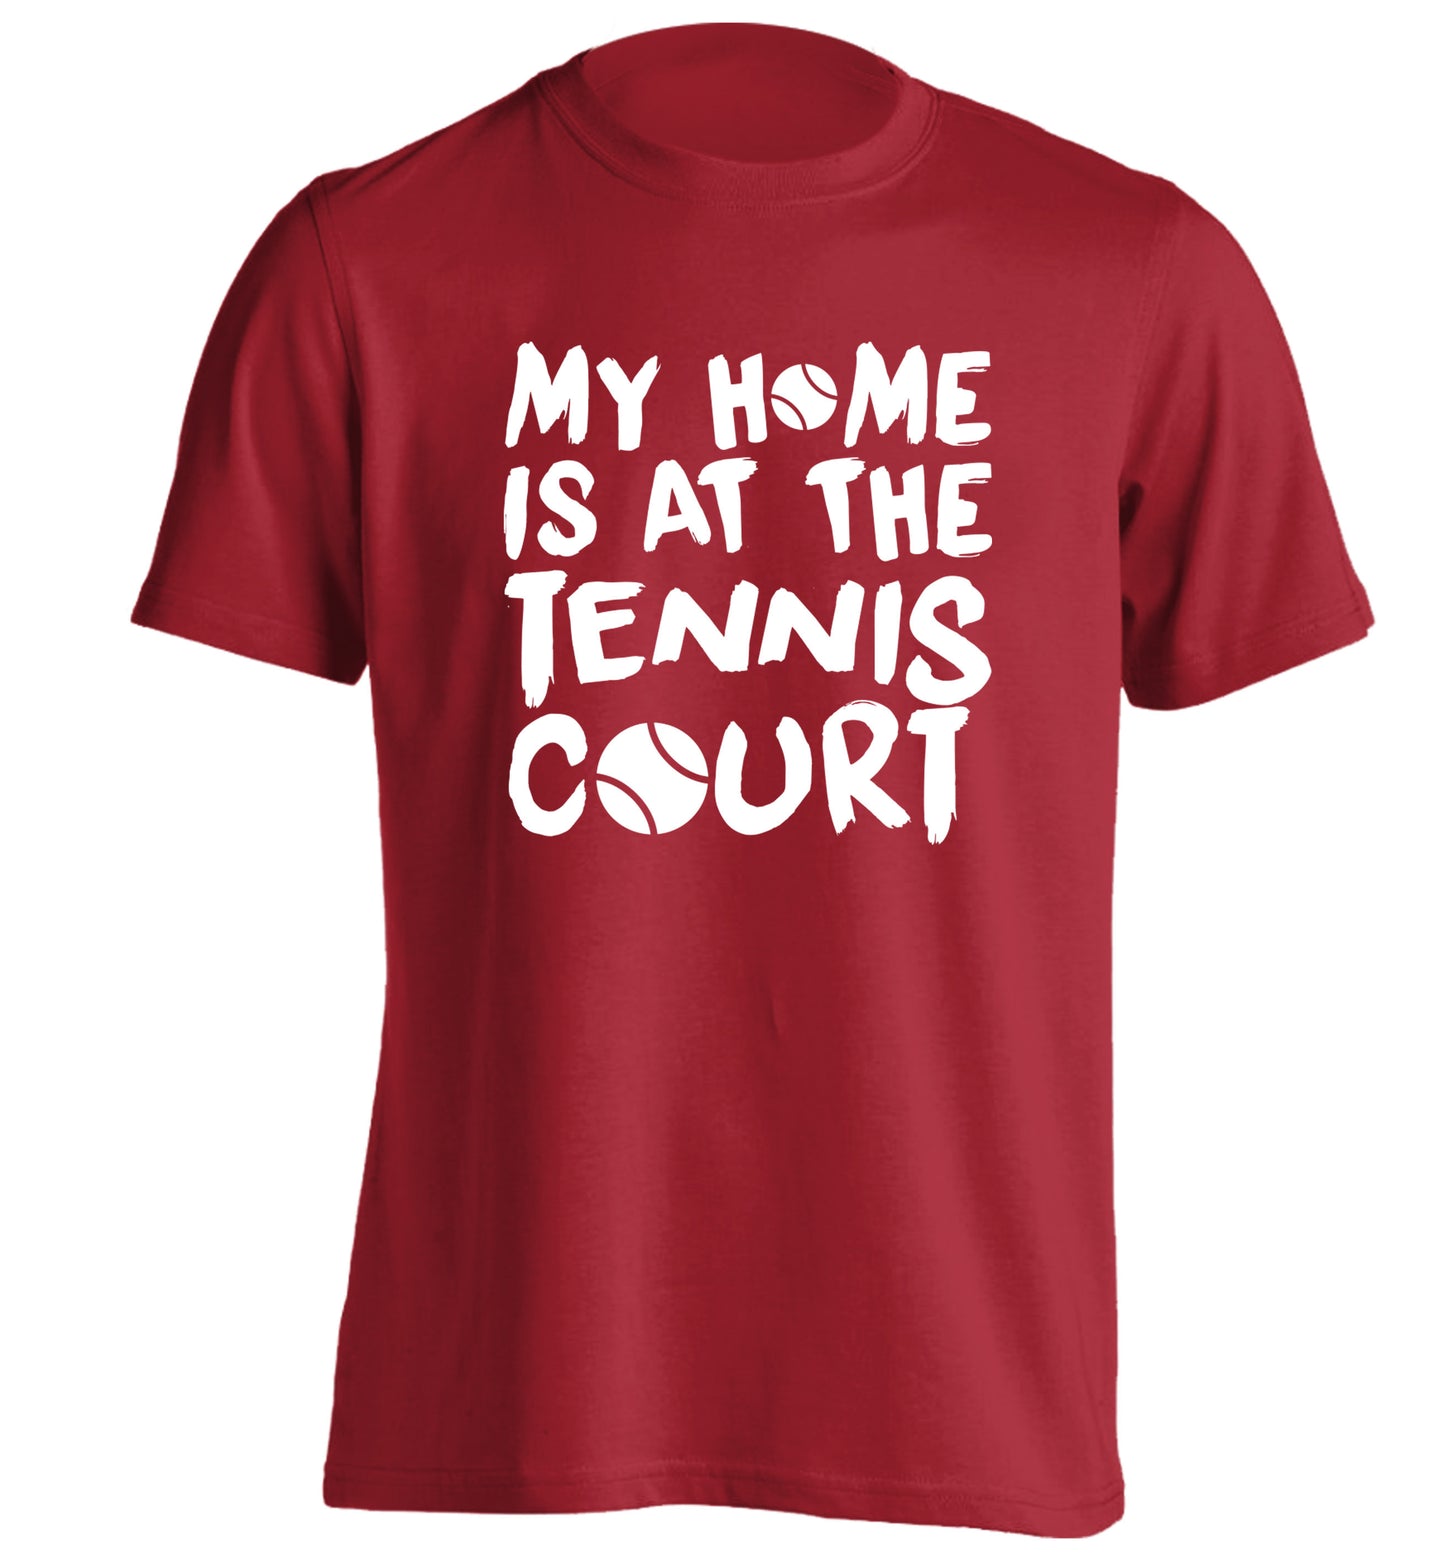 My home is at the tennis court adults unisex red Tshirt 2XL